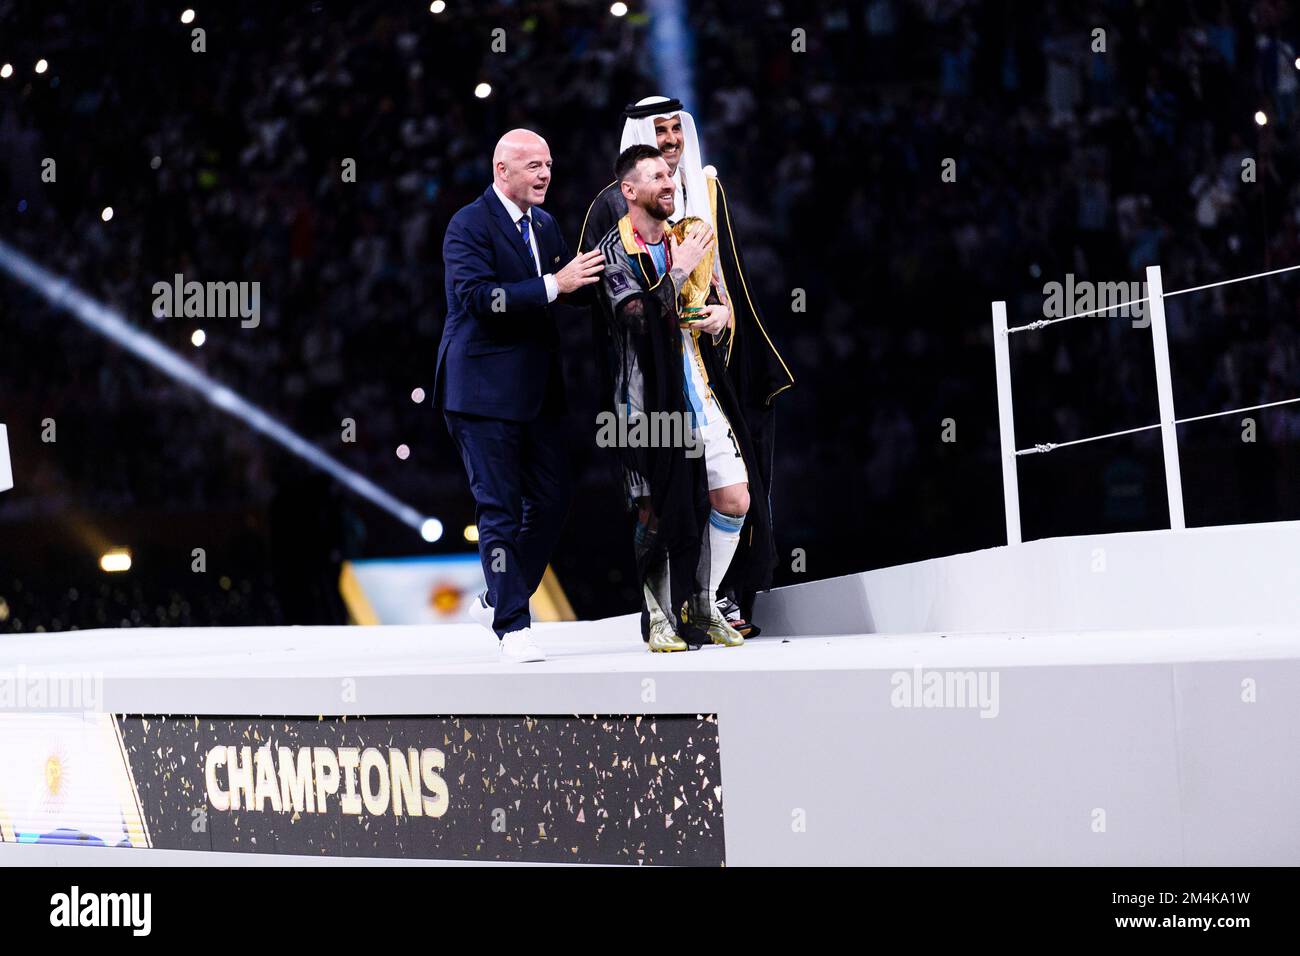 Lusail, Qatar. 18th Dec, 2022. Lusail Stadium Lionel Messi of Argentina receives Copa after Argentina won the 2022 FIFA World Cup after winning a penalty shootout after the match between Argentina x France ended in a 3-3 draw valid for the 2022 FIFA World Cup final held at the Lusail International Stadium, AD, Qatar (Marcio Machado/SPP) Credit: SPP Sport Press Photo. /Alamy Live News Stock Photo